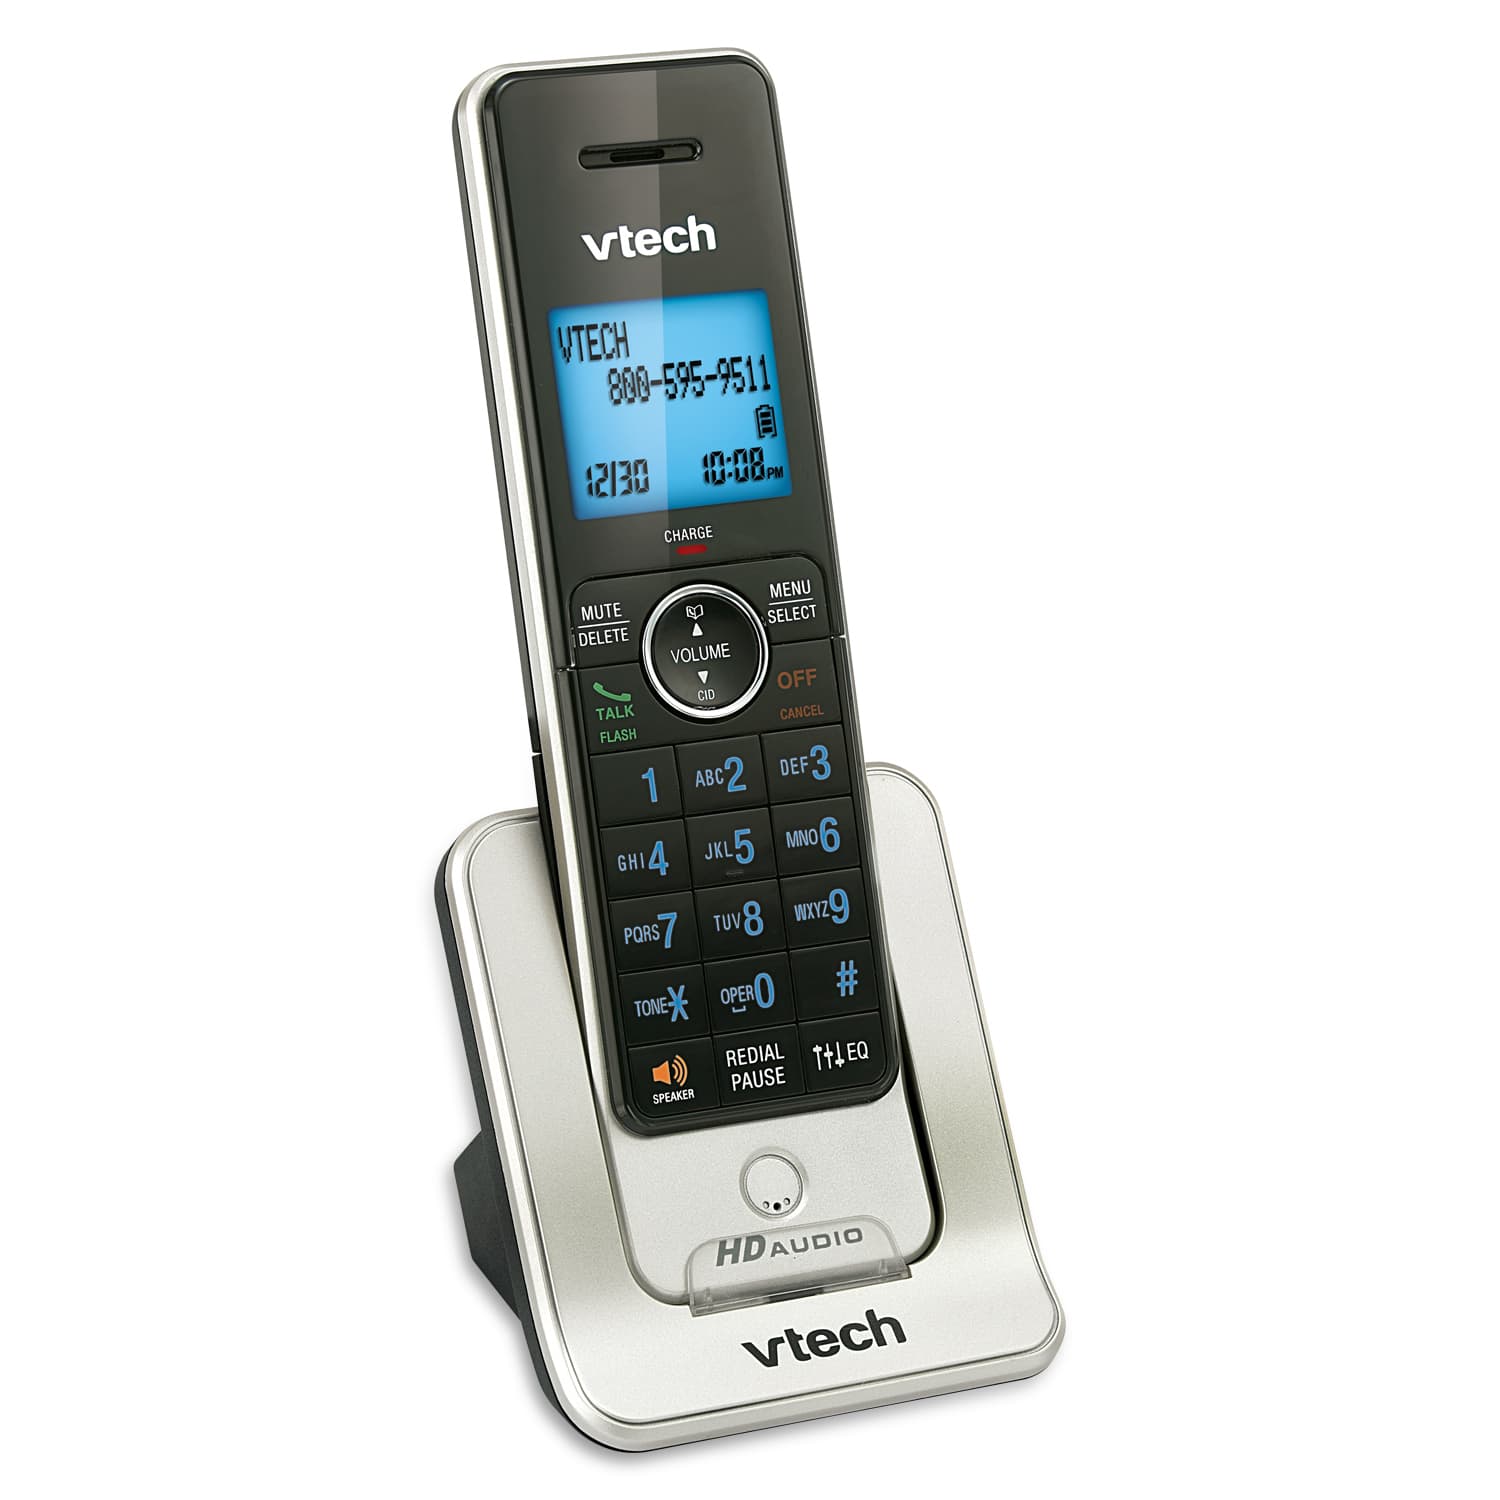 6 Handset Phone System with Cordless Headset